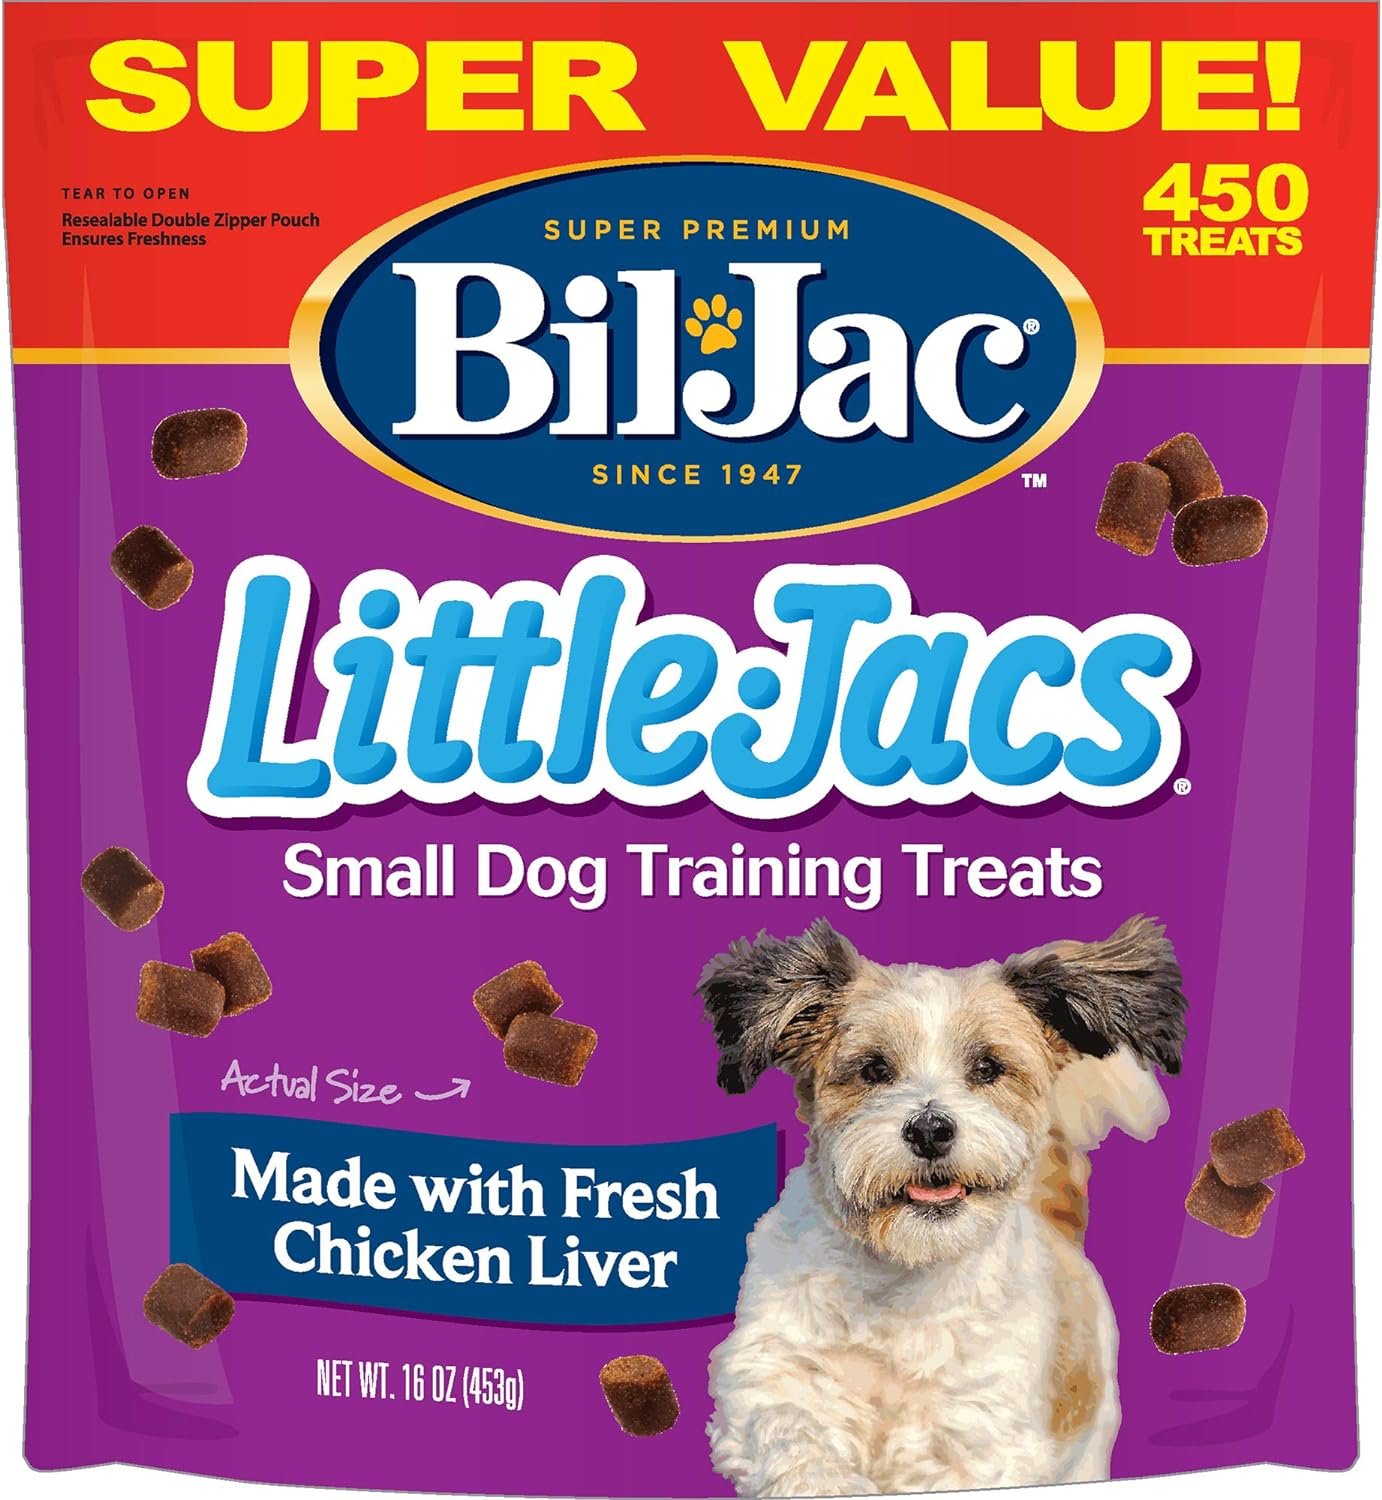 Bil-Jac Little Jacs Small Dog Training Treats - Soft Chicken Liver Dog Treats for Puppy Rewards - Real Chicken, No Fillers, 16oz Resealable Double Zipper Pouch (2-Pack)